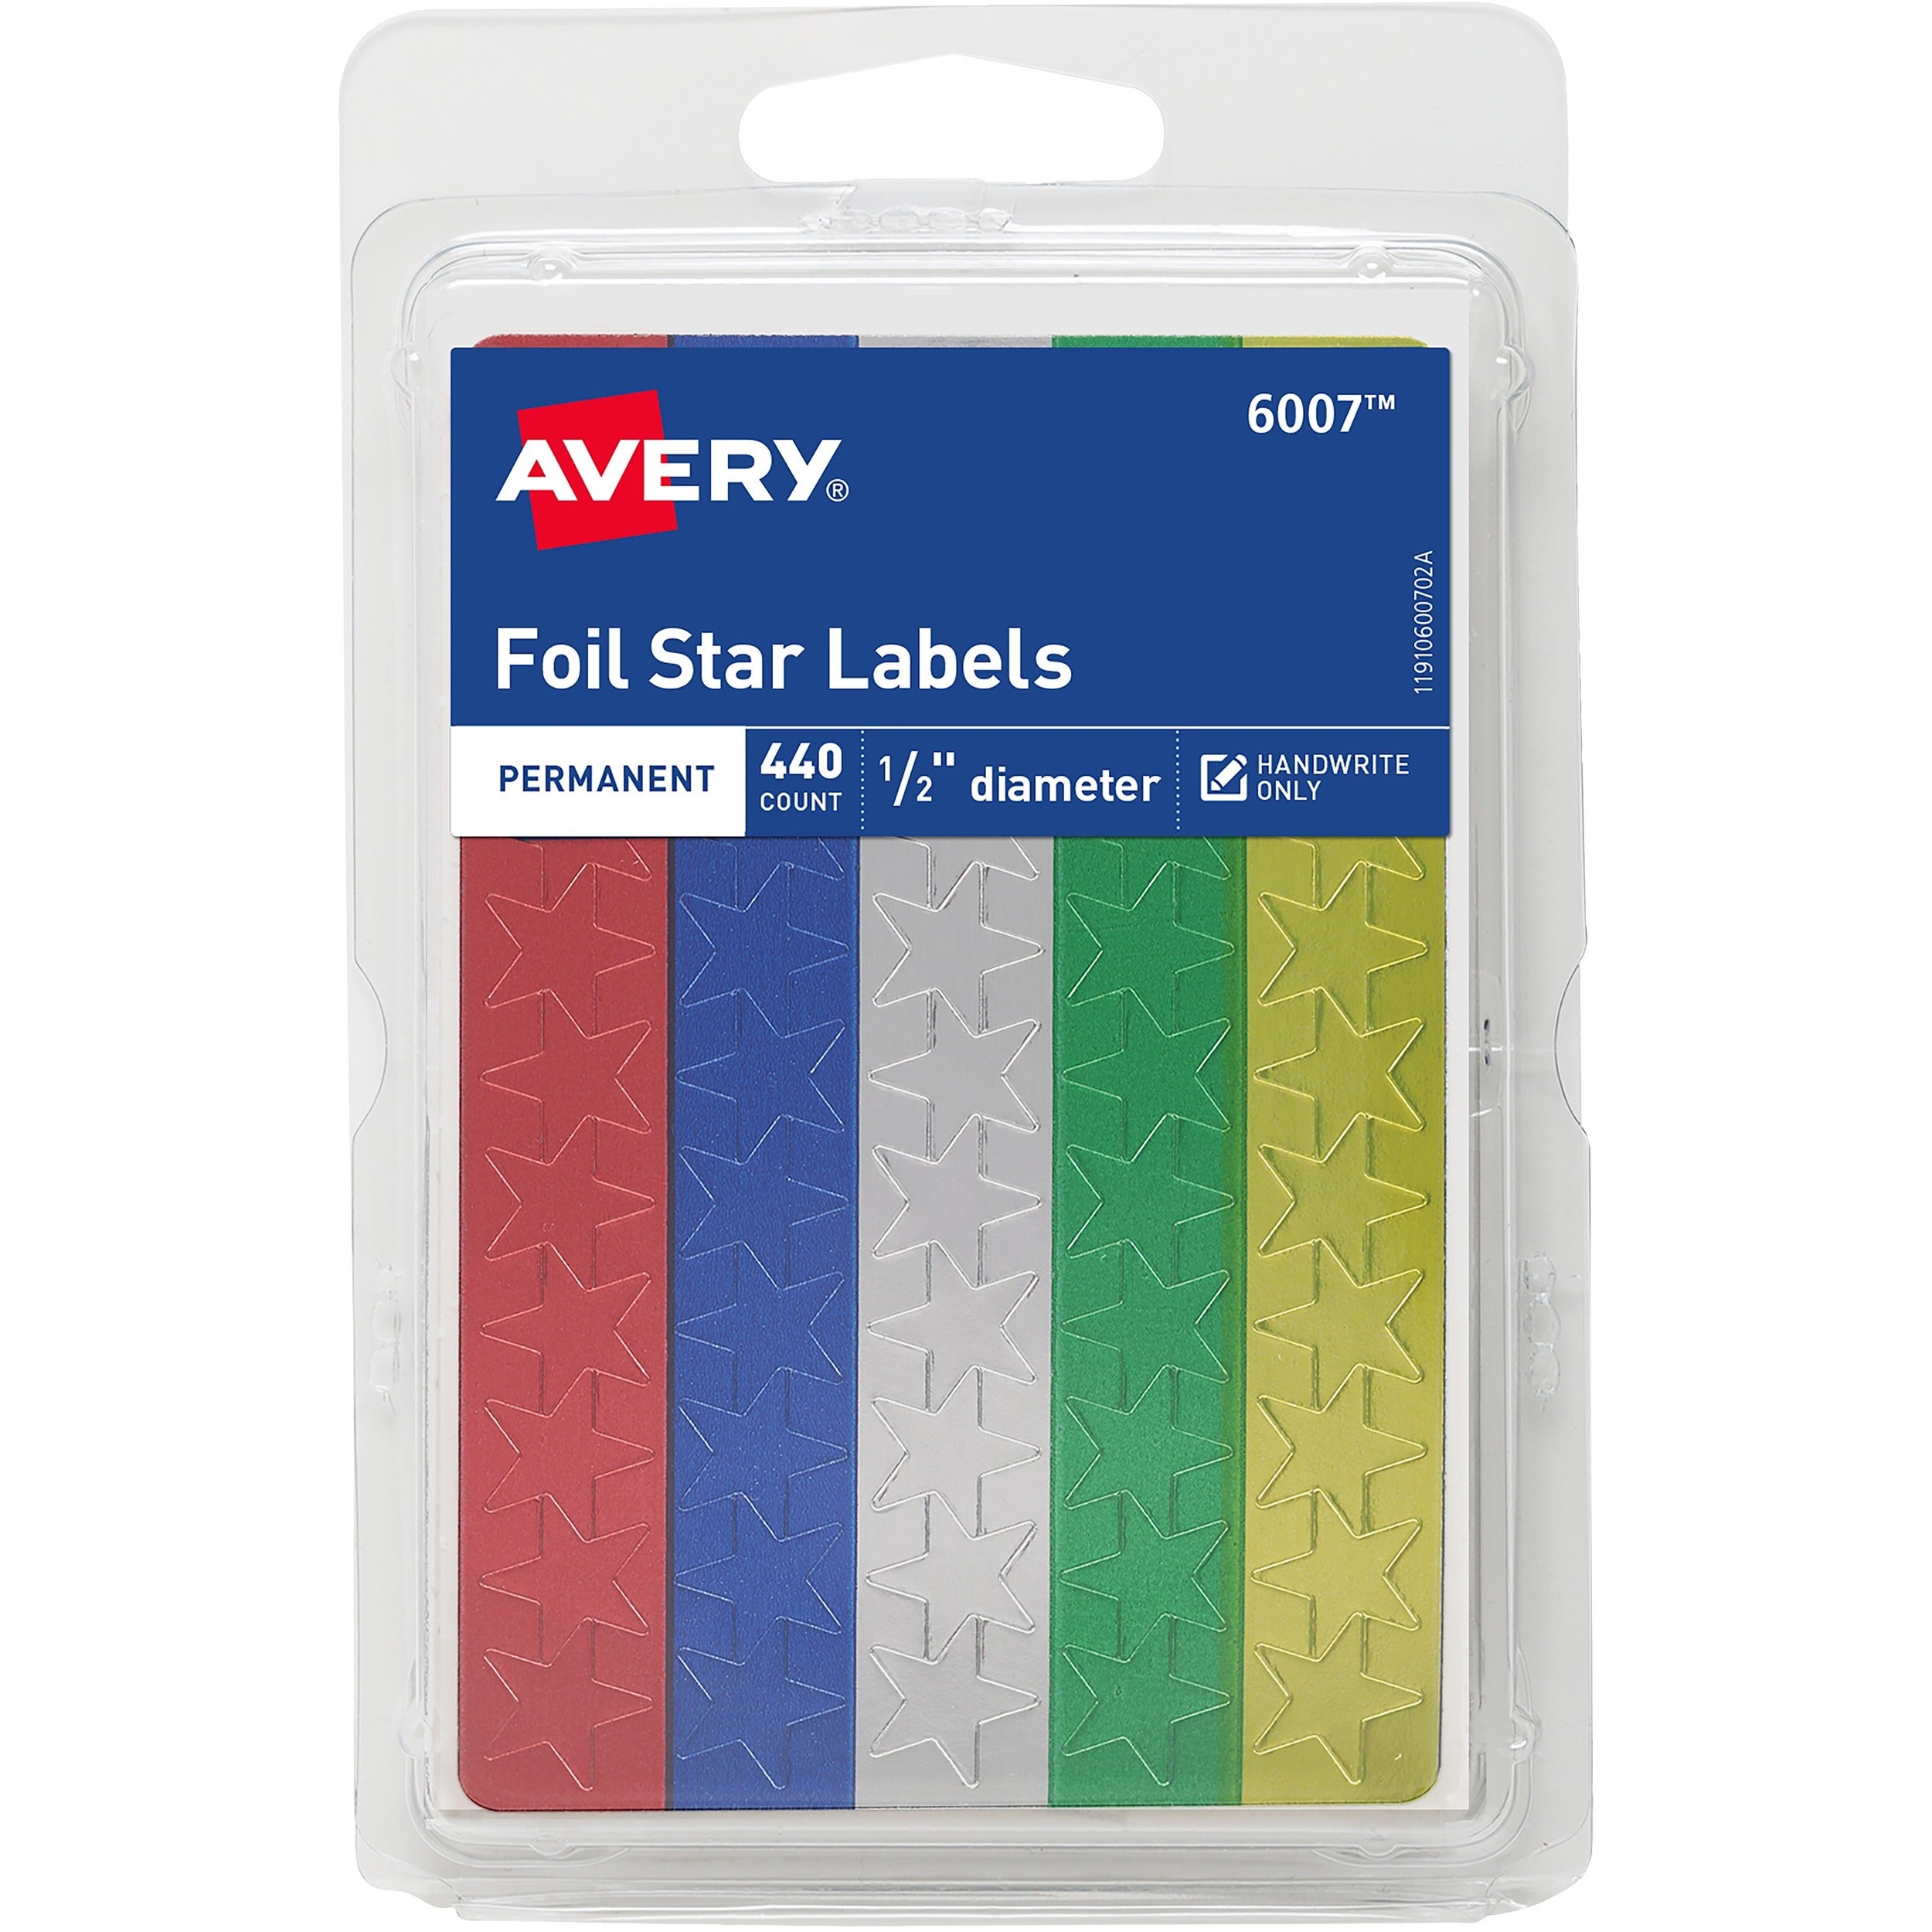 Avery Assorted Foil Star Labels - Learning Theme/Subject - Star Shape - Permanent Adhesive - 0.50" Height - Red, Blue, Silver, Green, Gold - Paper - 6 - 